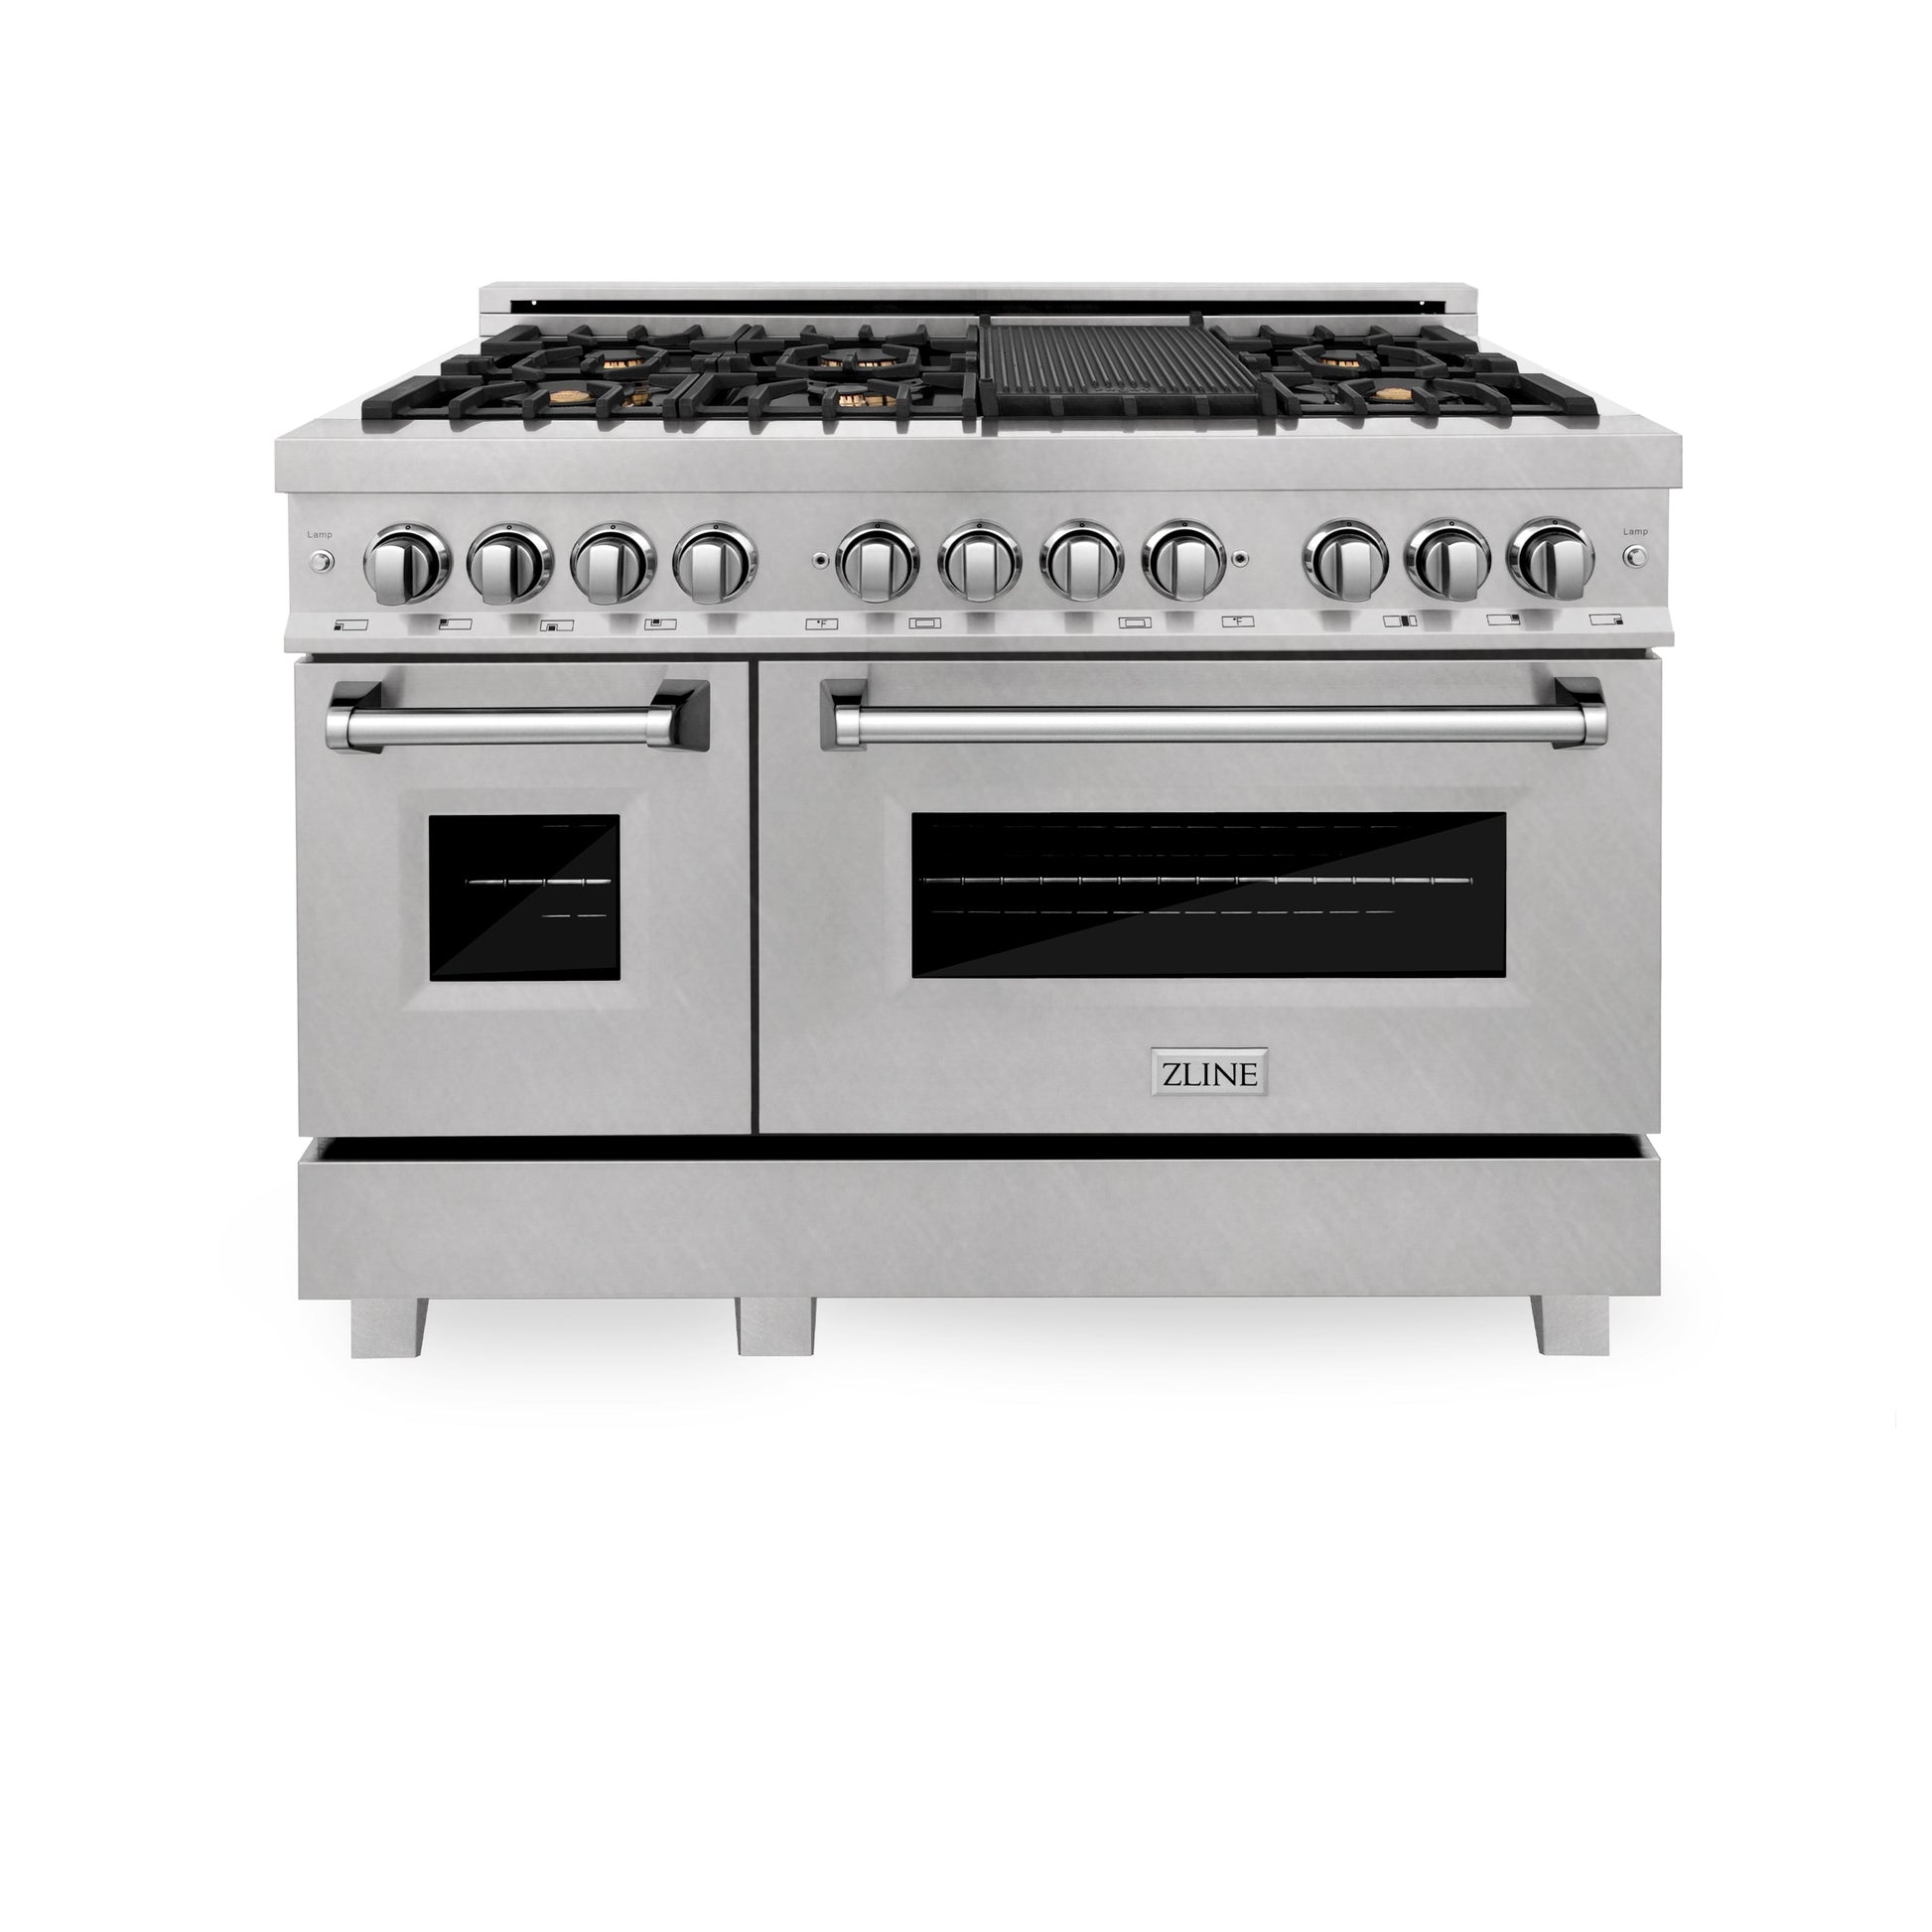 ZLINE 48" Dual Fuel Range with Electric Oven and Gas Cooktop - Fingerprint Resistant Stainless Steel, Brass Burners, Griddle